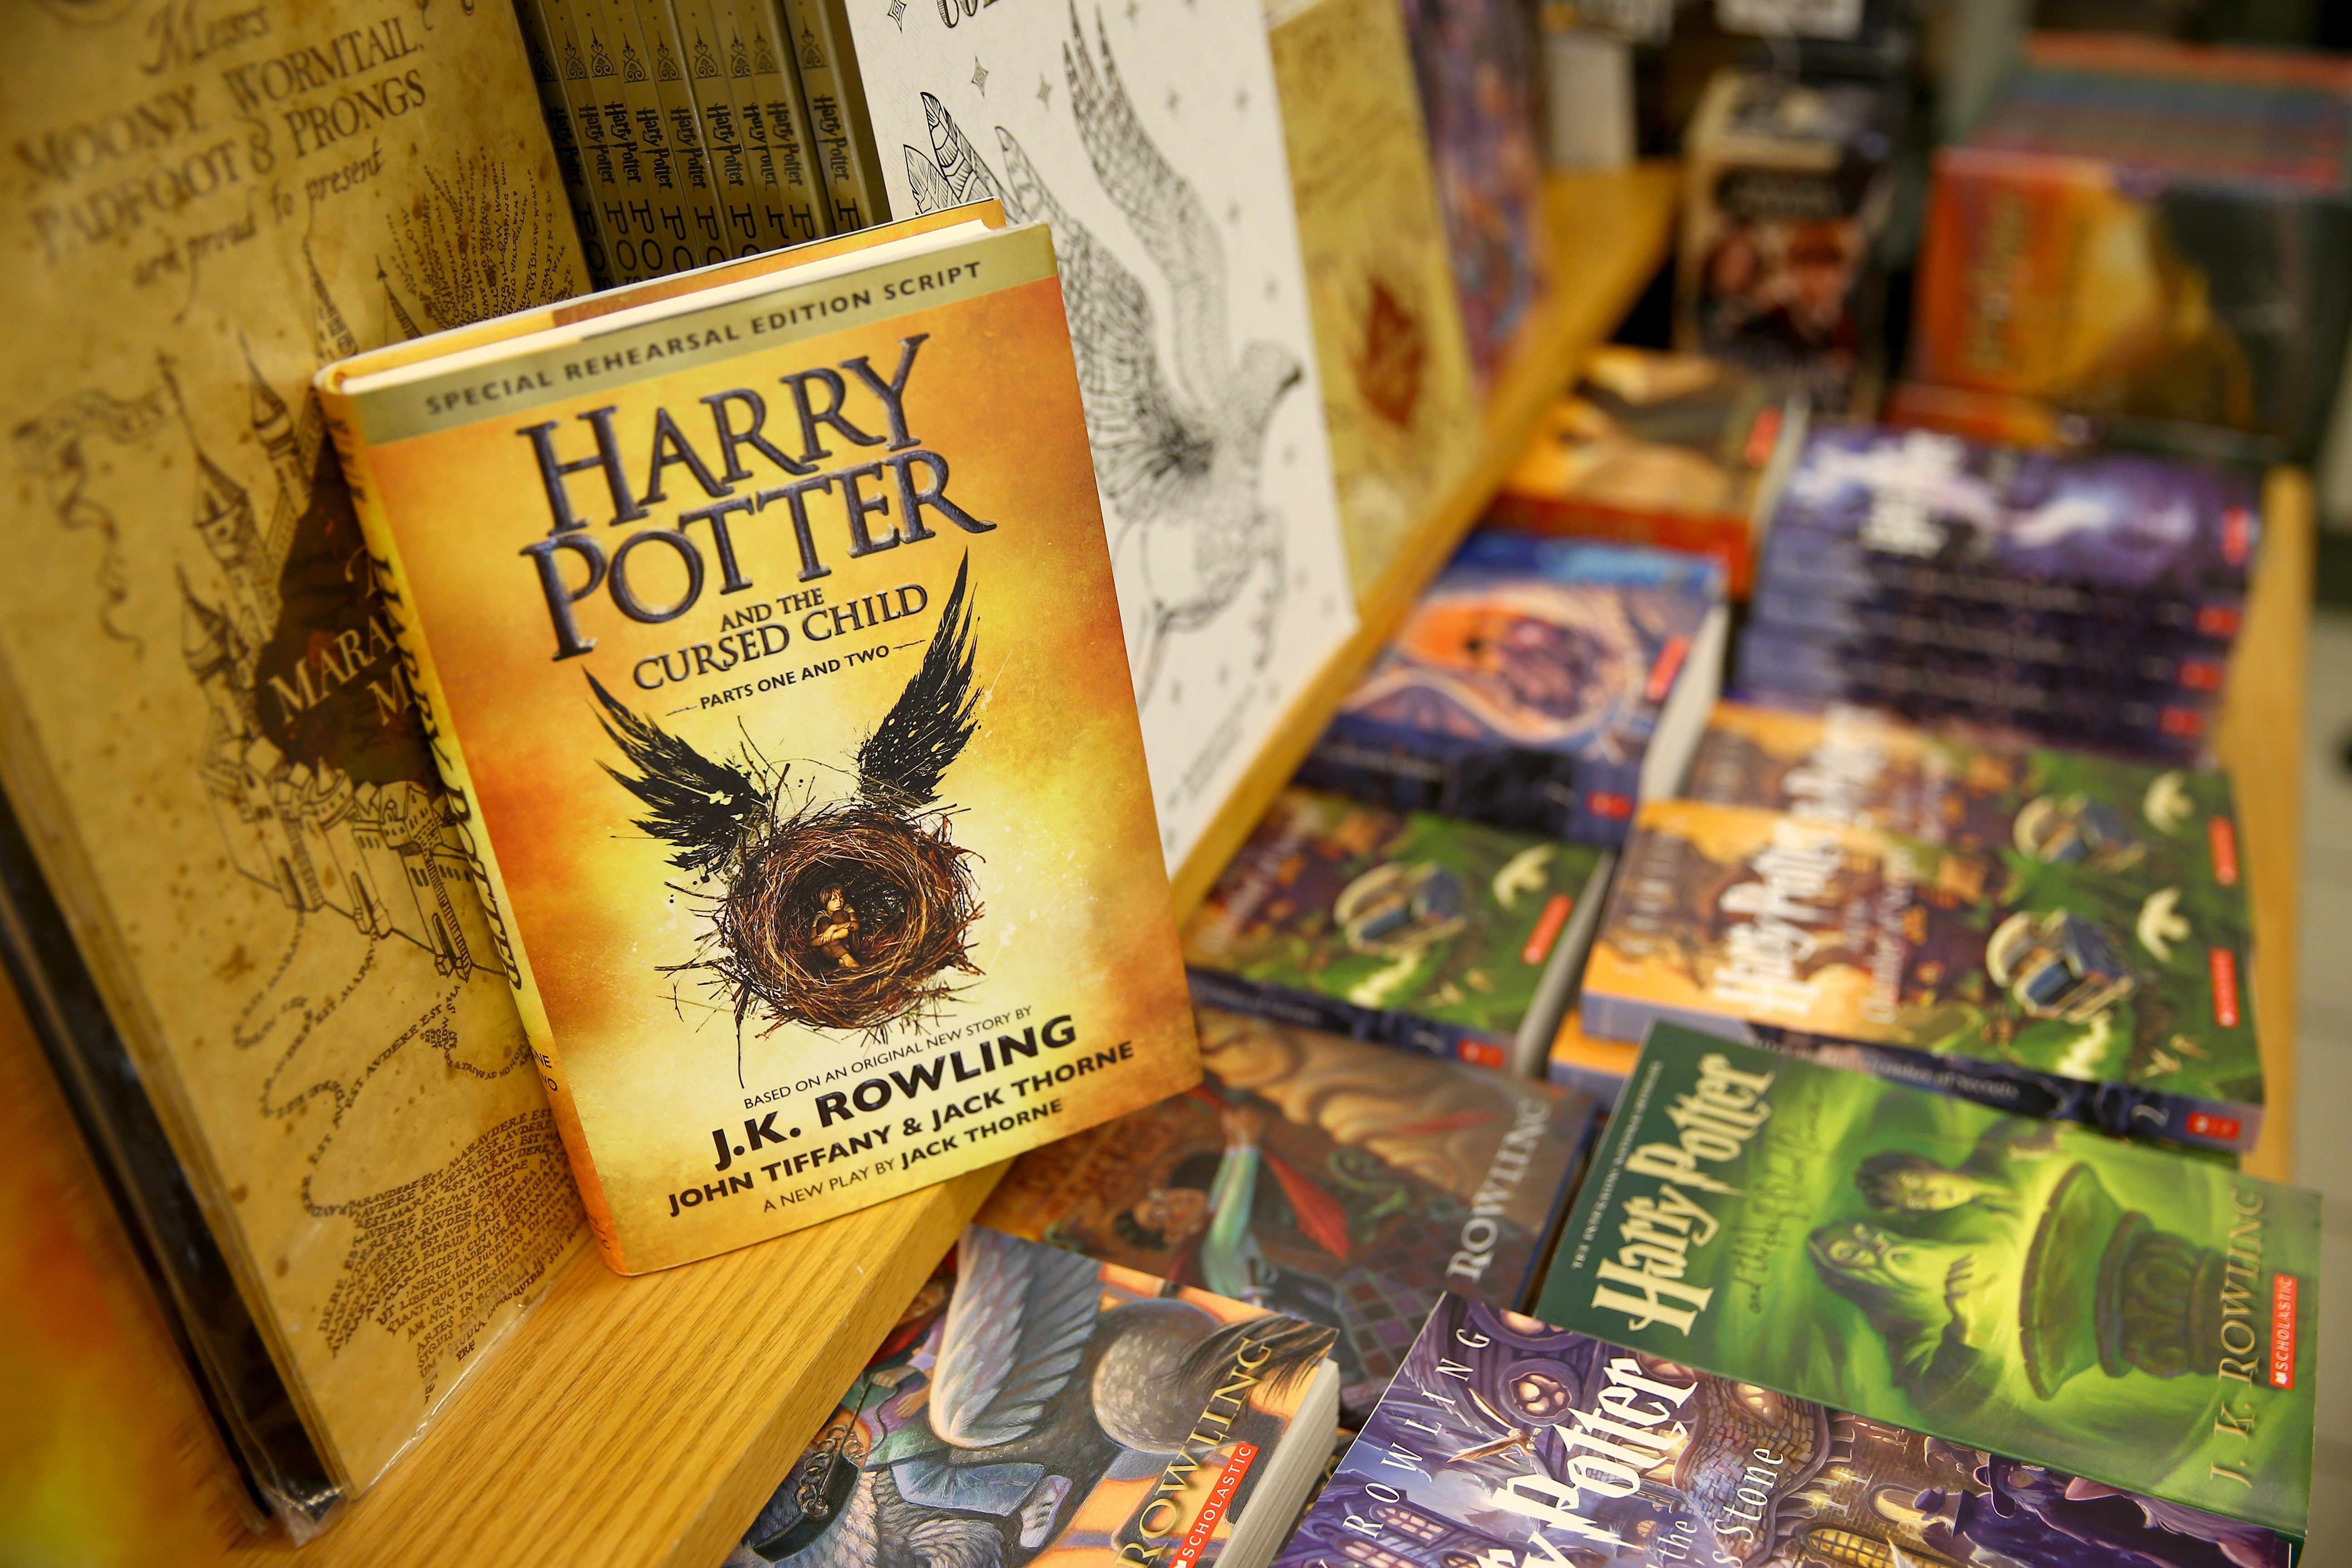 harry potter and the cursed child book spoilers